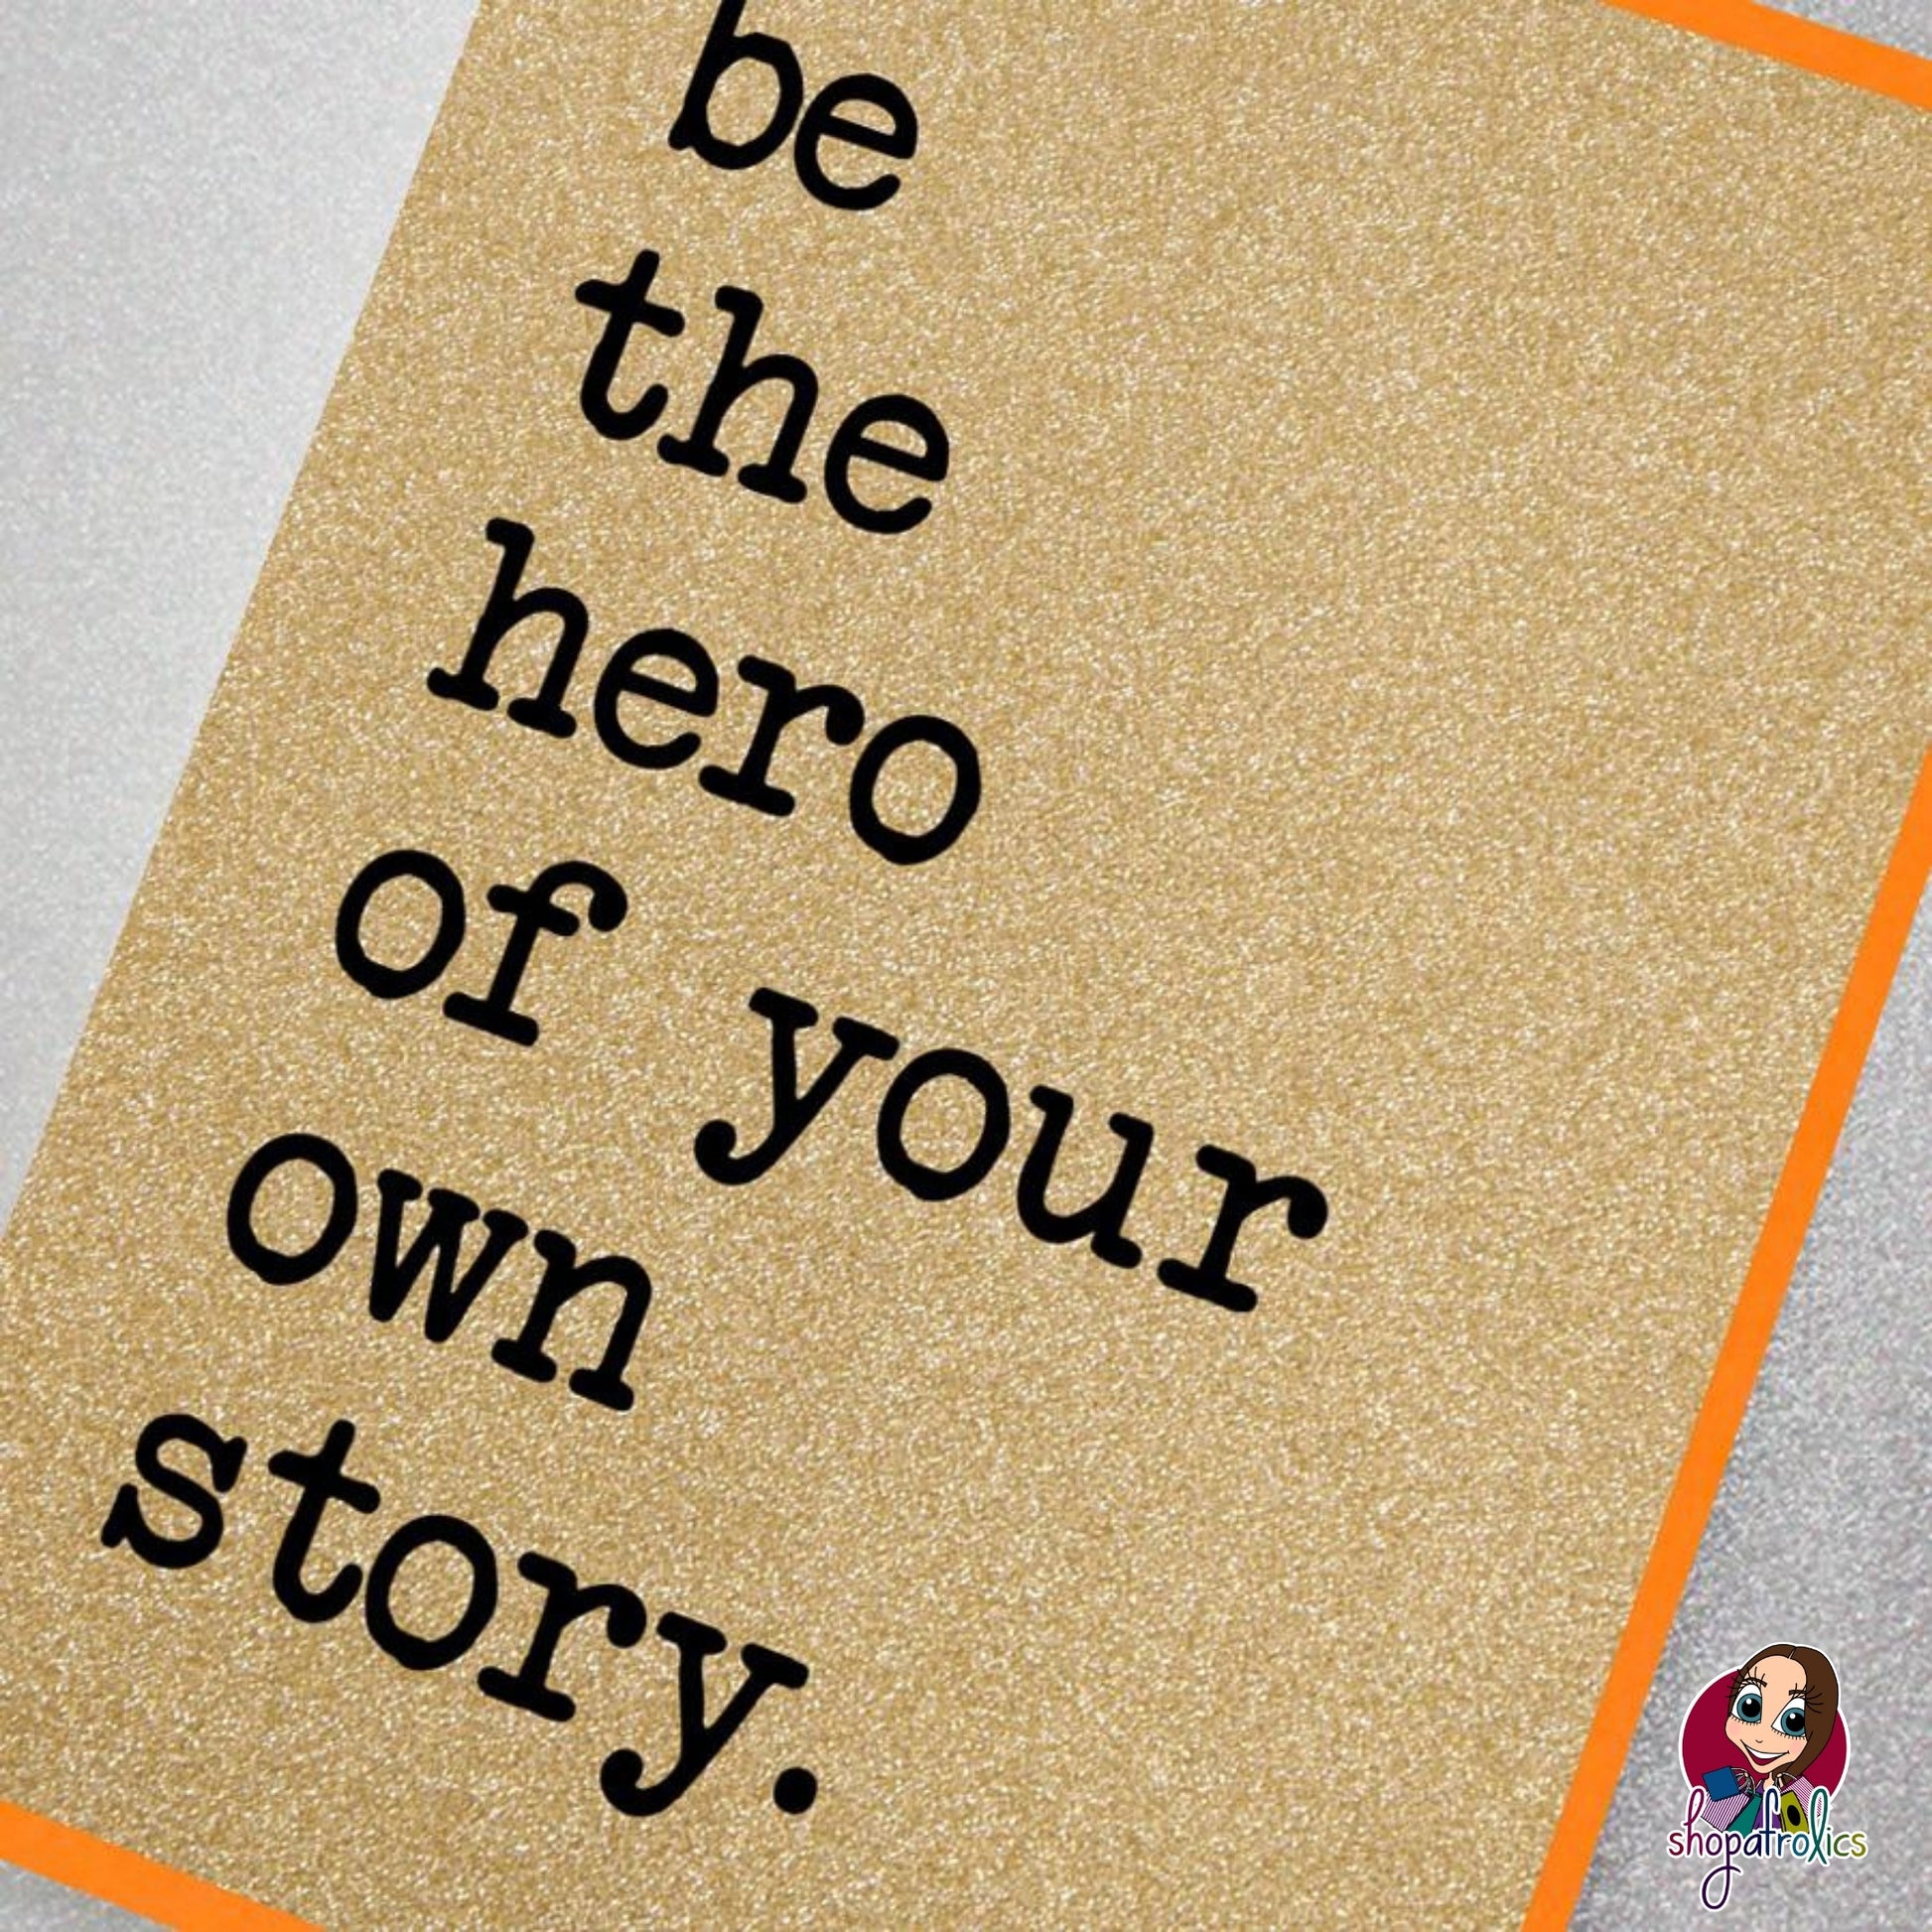 A fabulously sparkly gold glitter effect greeting card featuring the slogan: Be the hero of your own story.